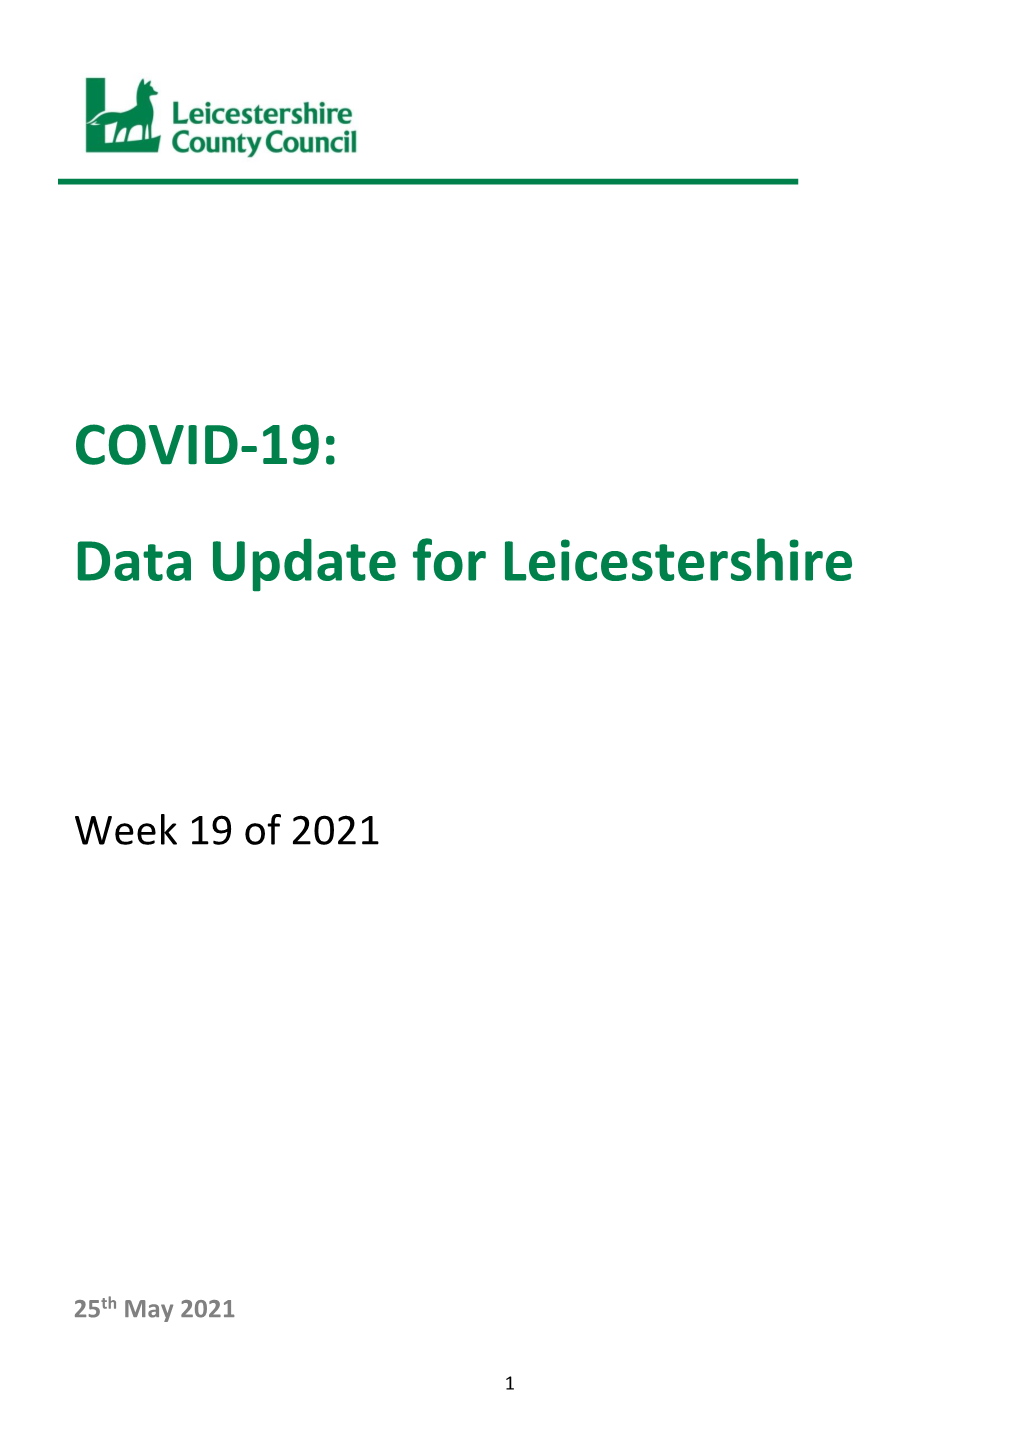 COVID-19: Data Update for Leicestershire (Week 19 of 2021)